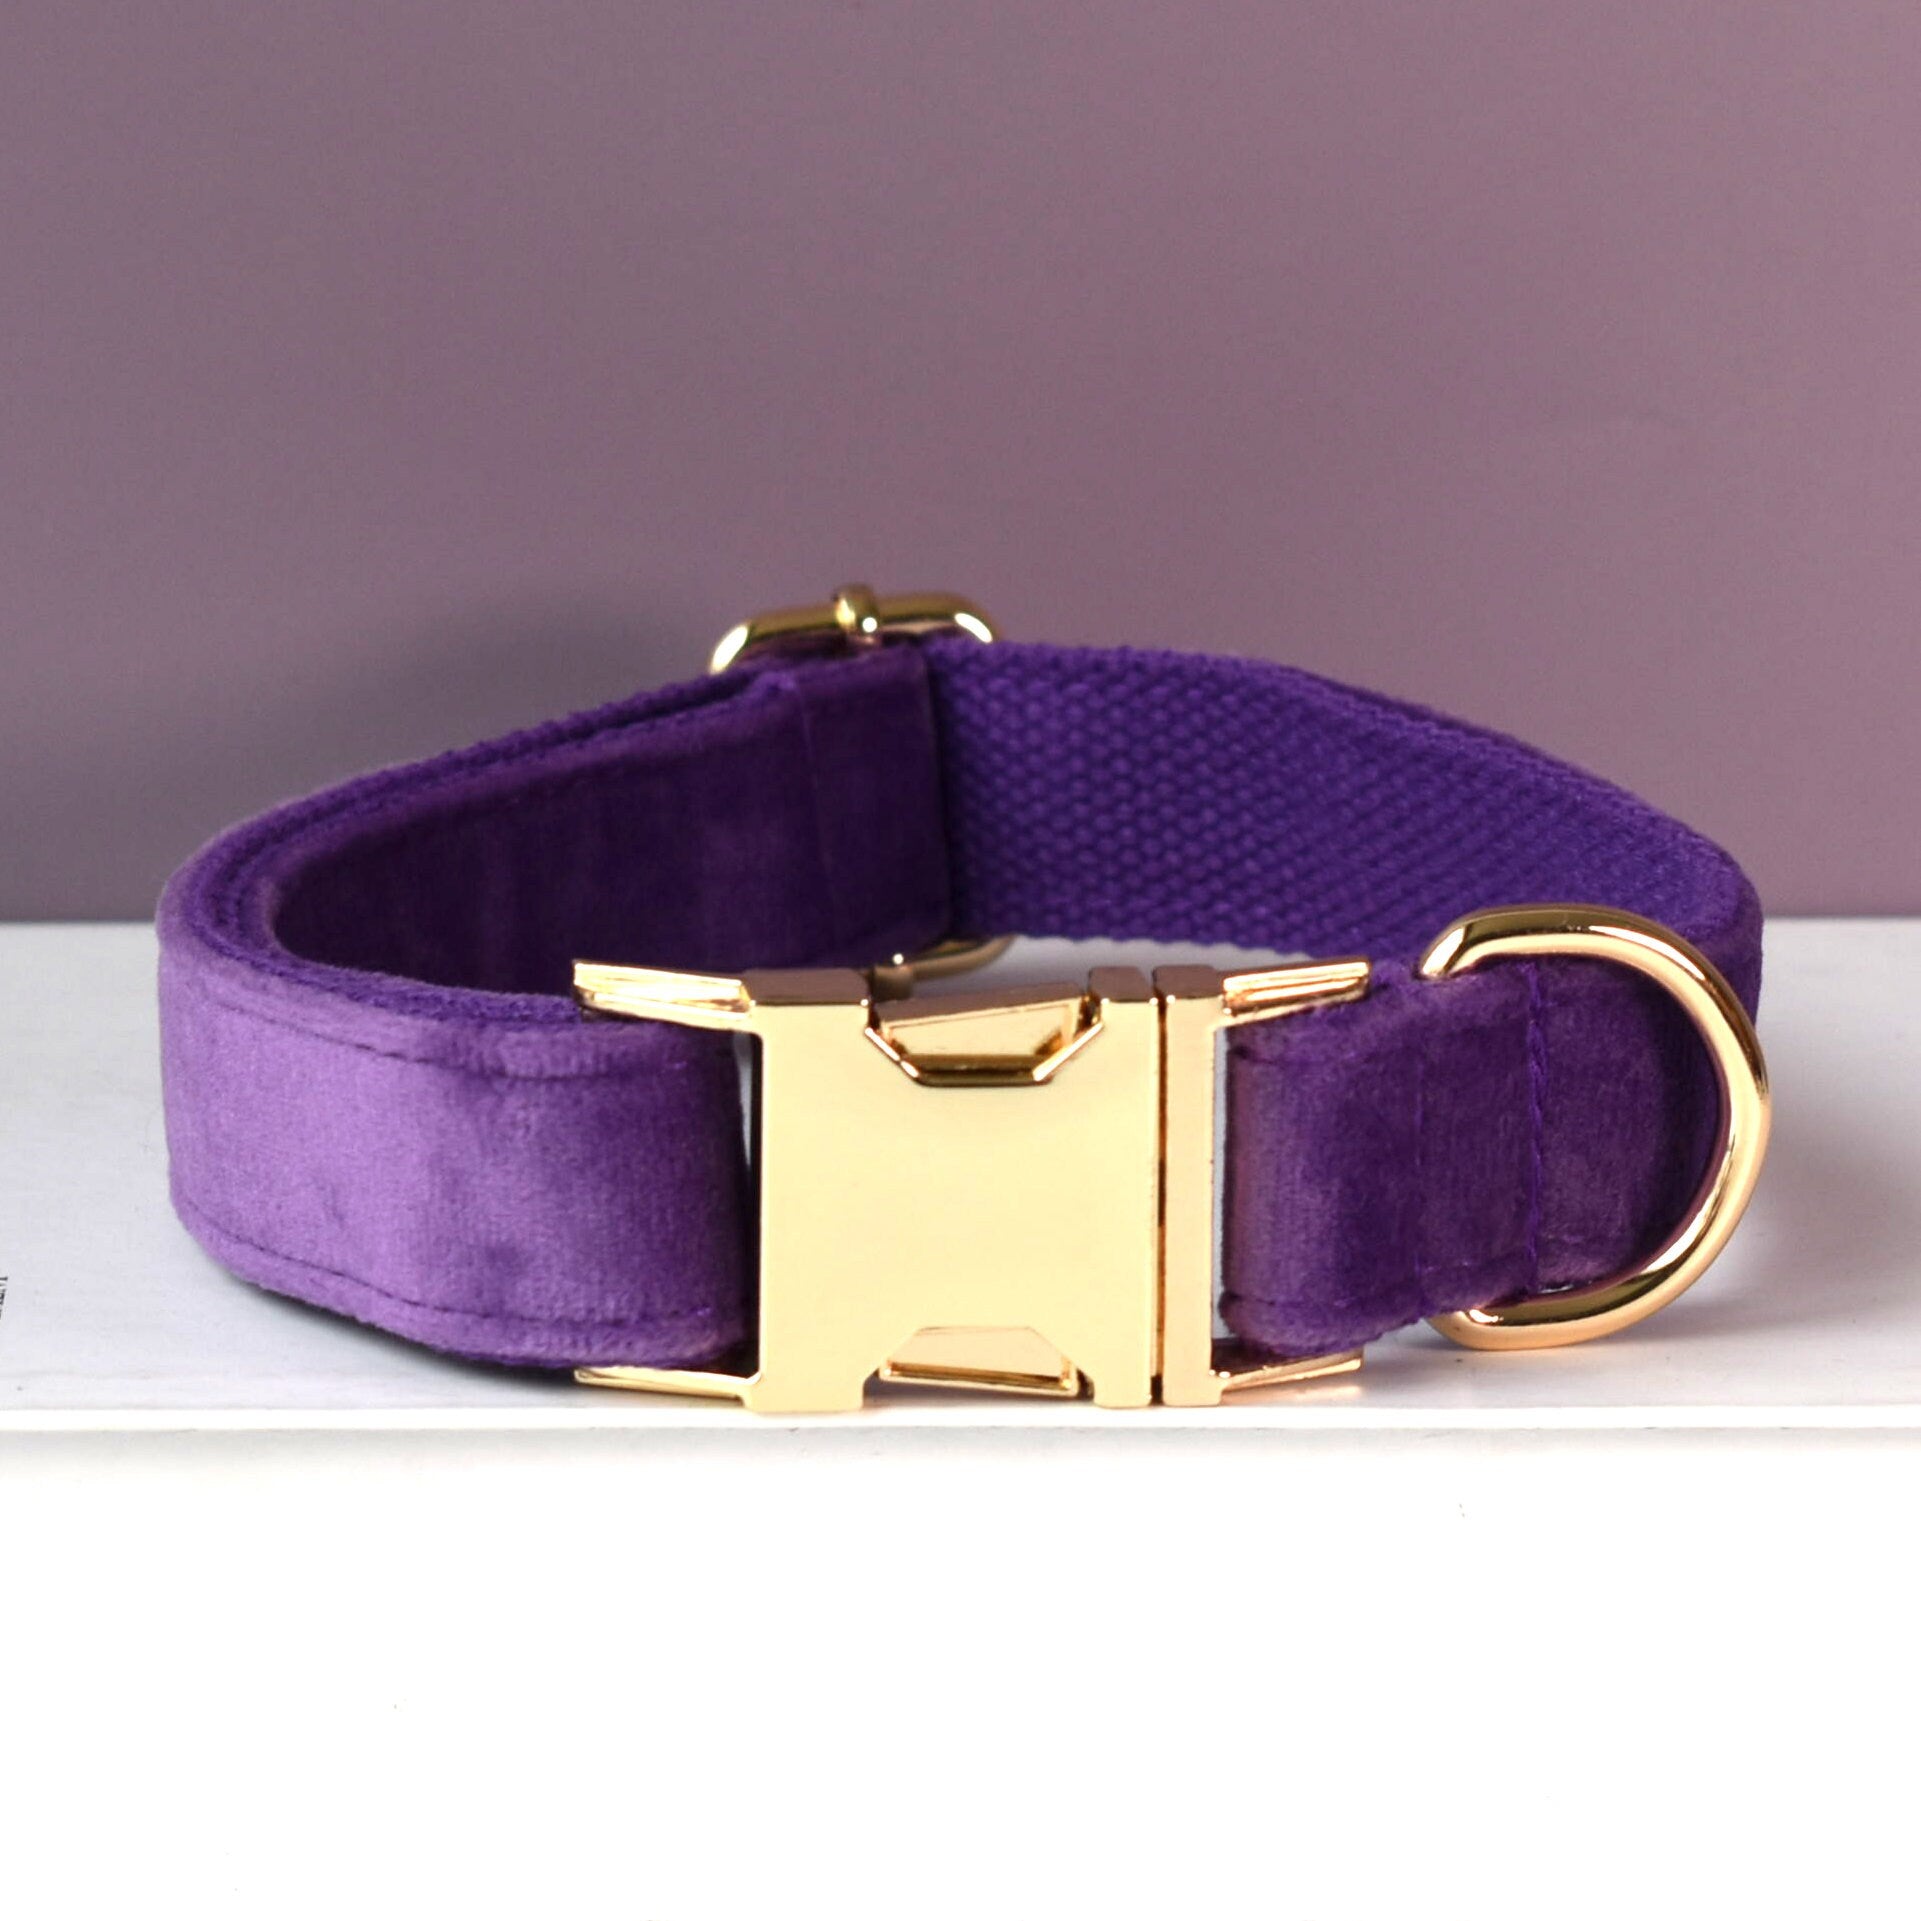 Purple Personalized Dog Collar Combo Set, Matching Bowtie, Leash and Harness